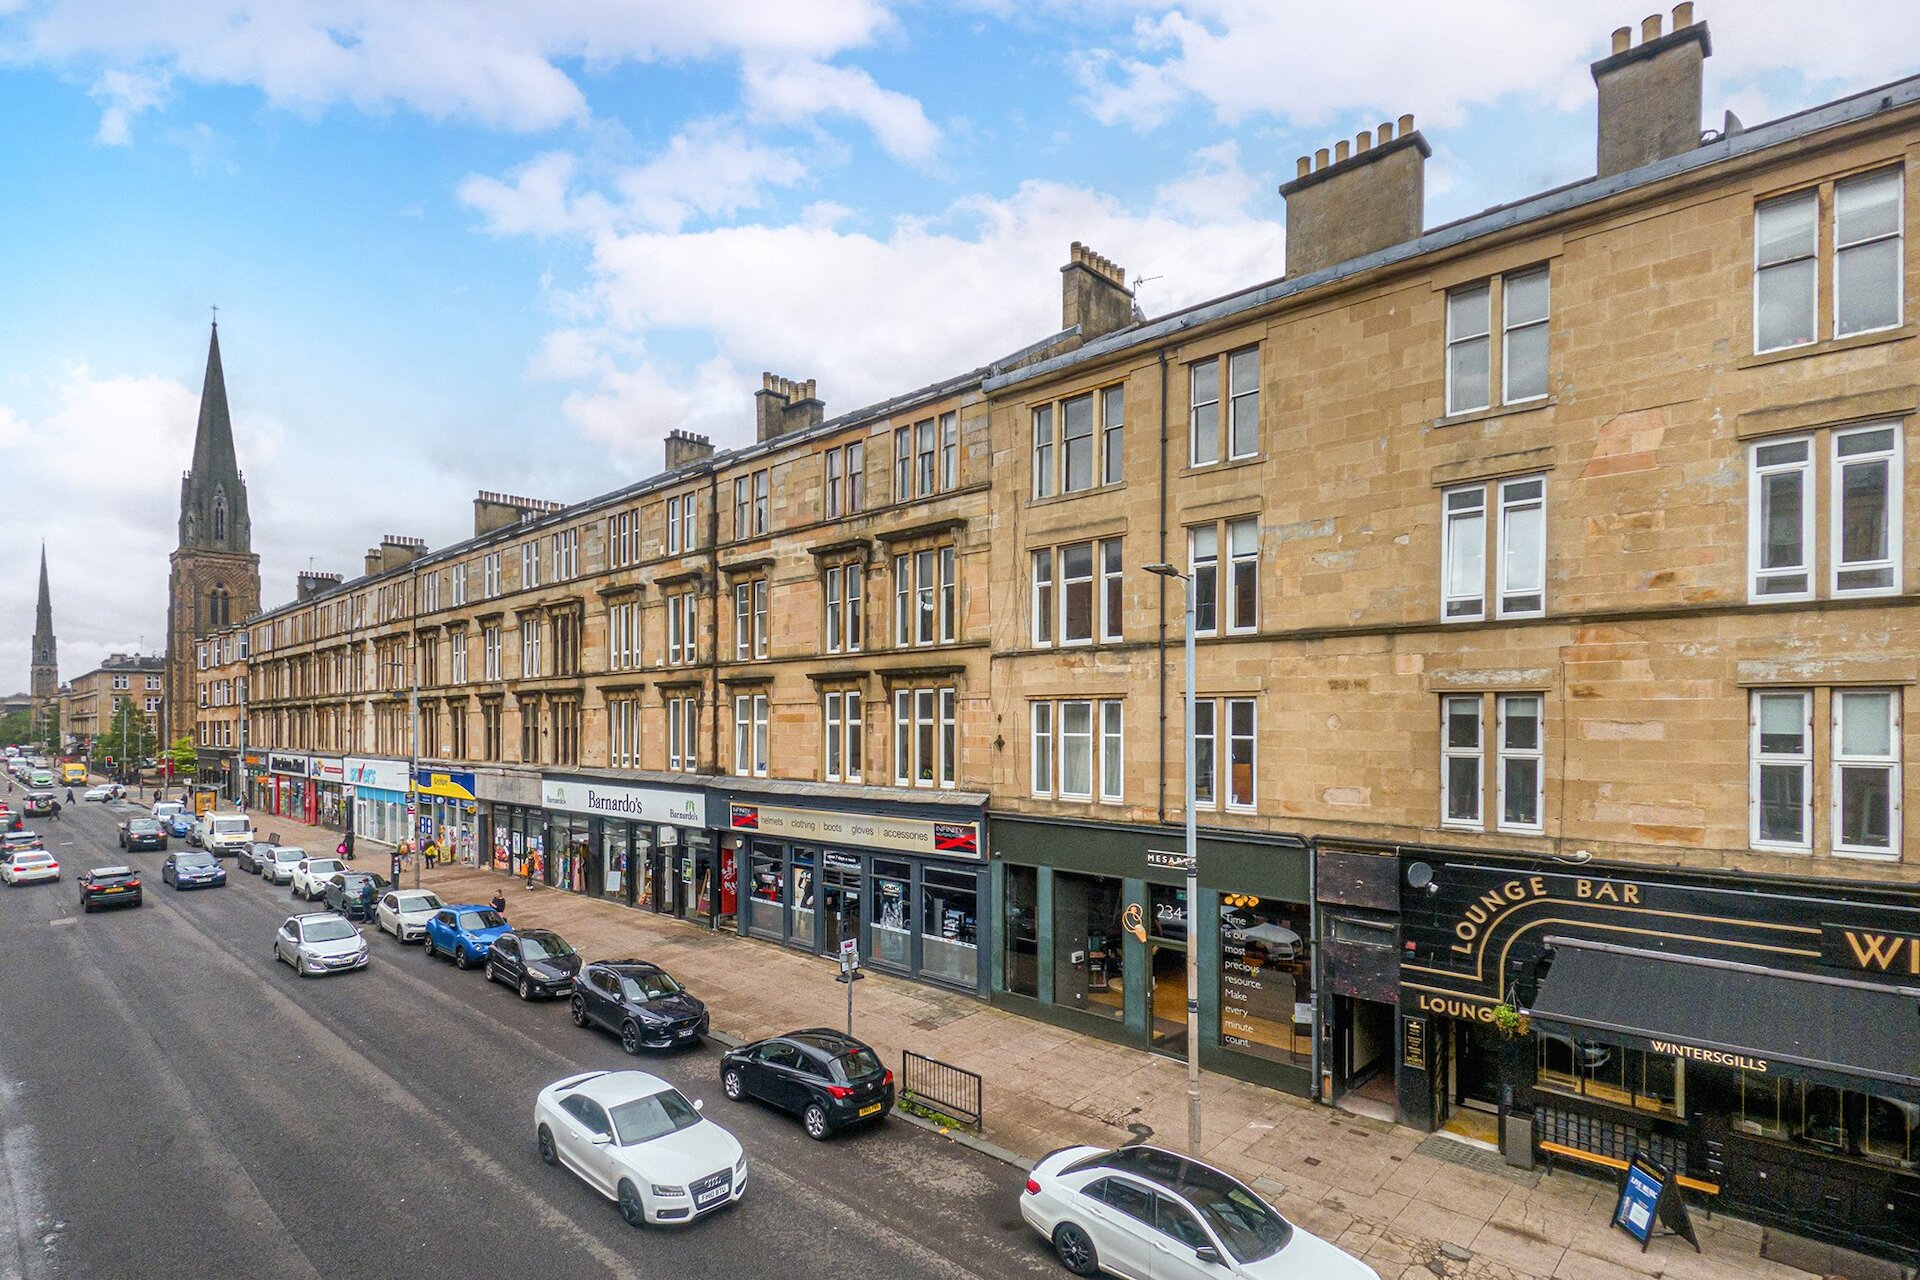 3/2, 230 Great Western Road, Woodlands, Glasgow, G4 9EJ - Picture #1